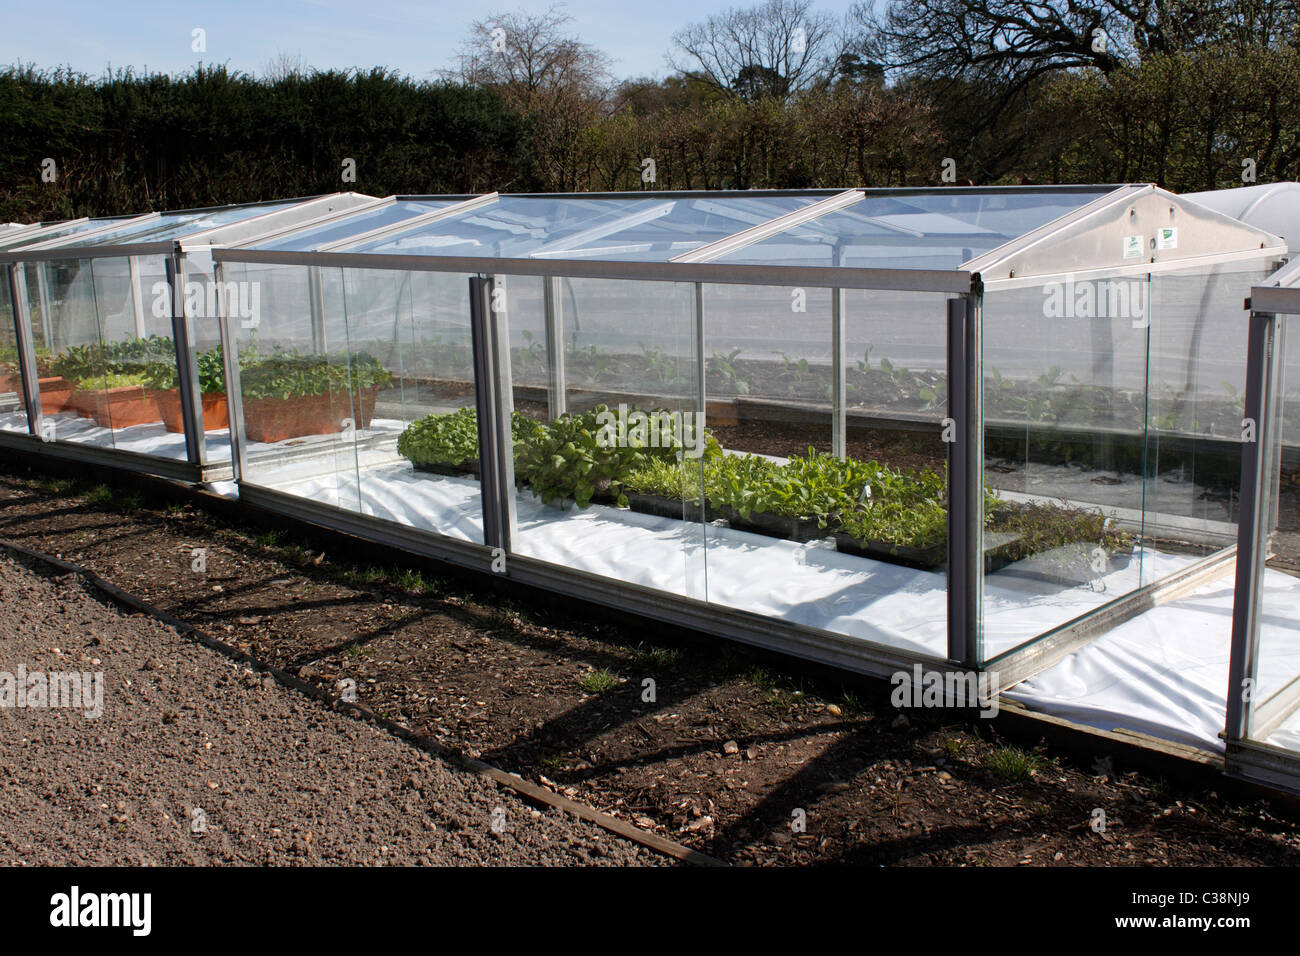 GLASS COLD FRAME WITH SALAD CROPS GROWING INSIDE. Stock Photo